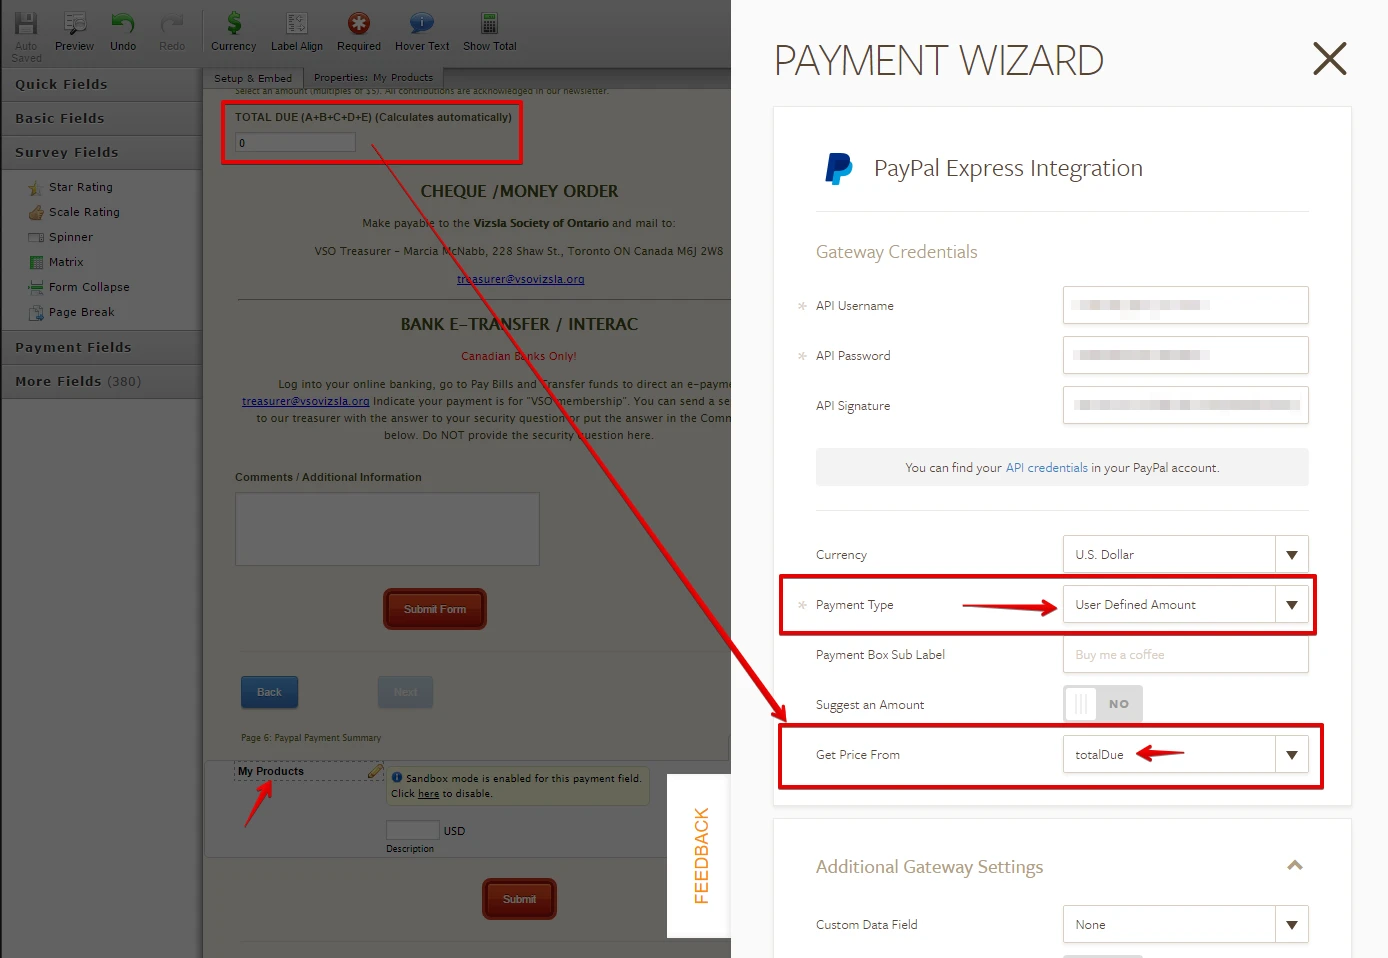 Form Submit always takes form to PayPal even if Paypal payment isnt selected Image 4 Screenshot 123